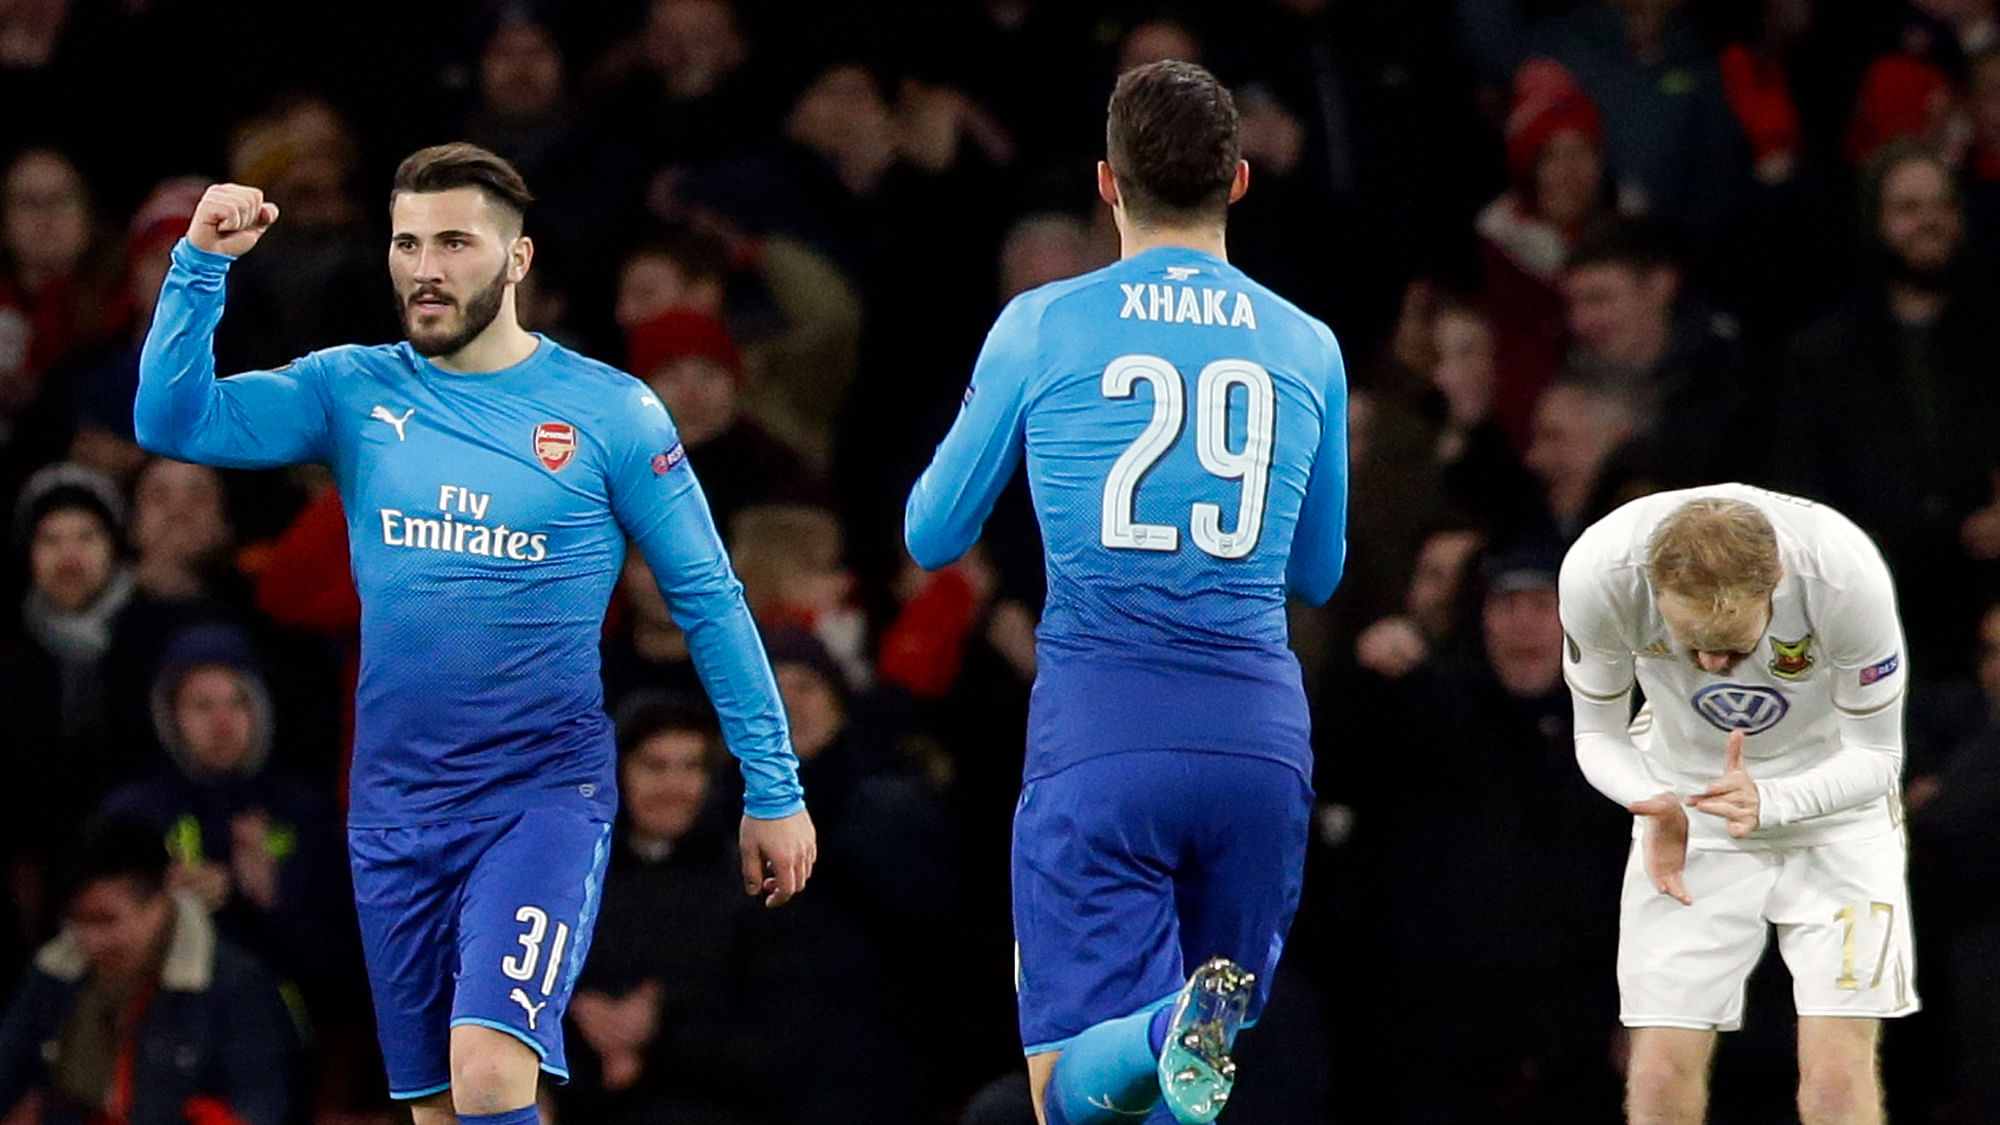 Arsenal’s Sead Kolasinac, right, celebrates after scoring his side’s first goal.